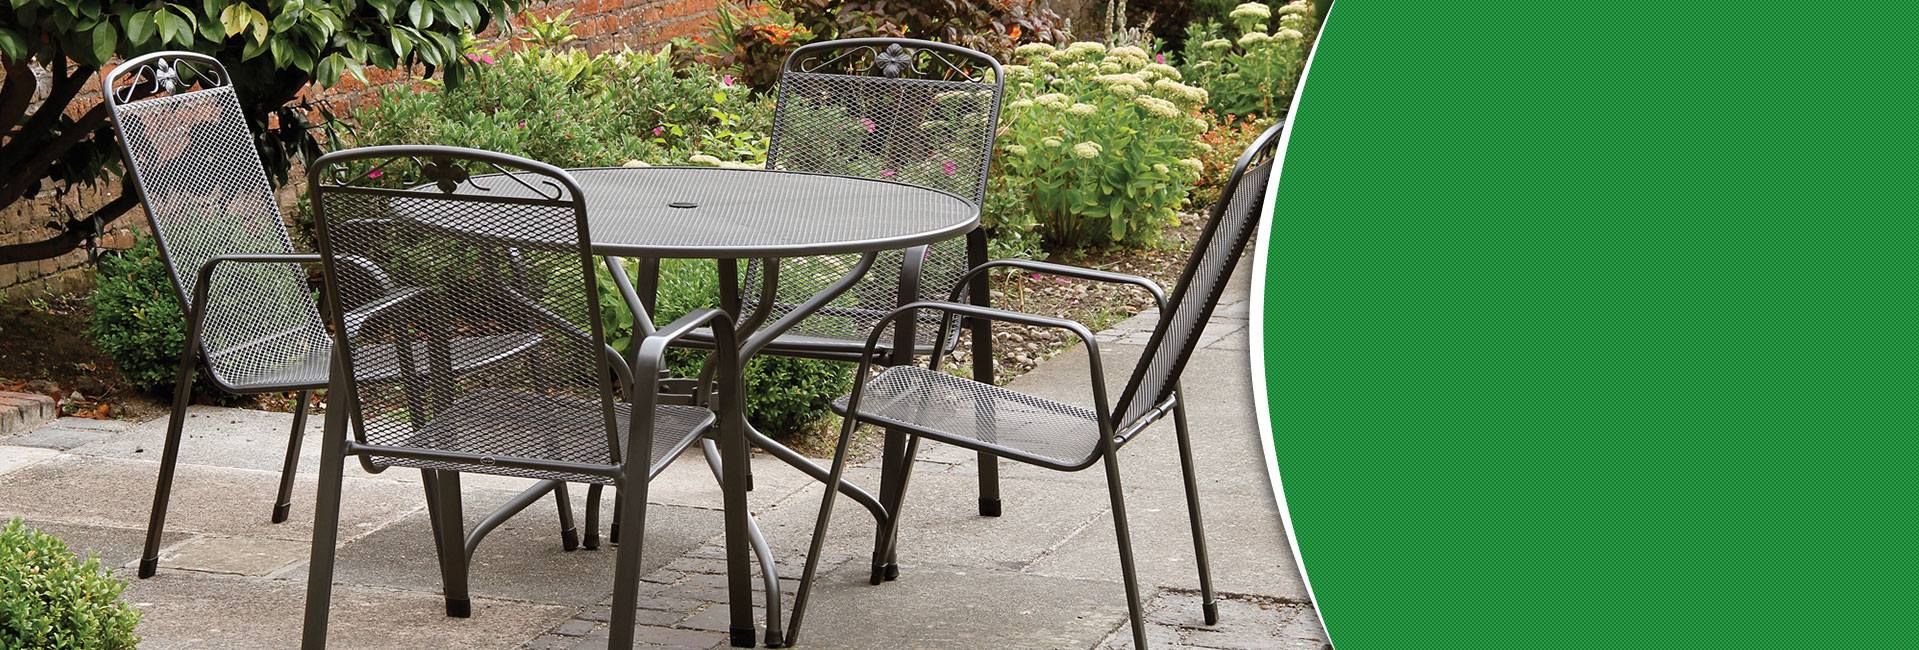 Bistro Sets For Your Leisure Time